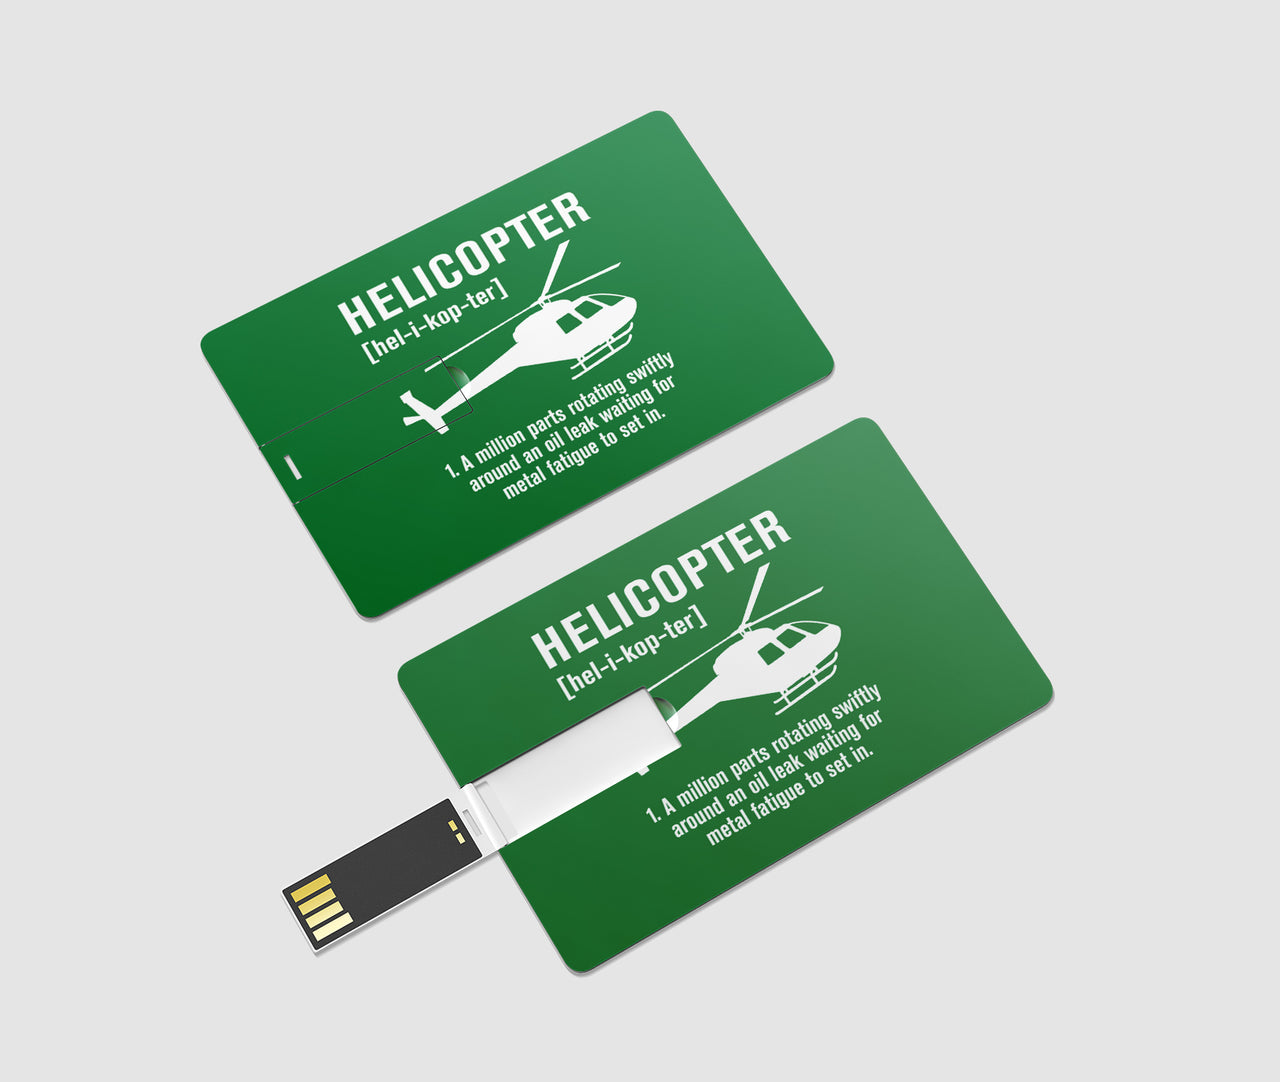 Helicopter [Noun] Designed USB Cards